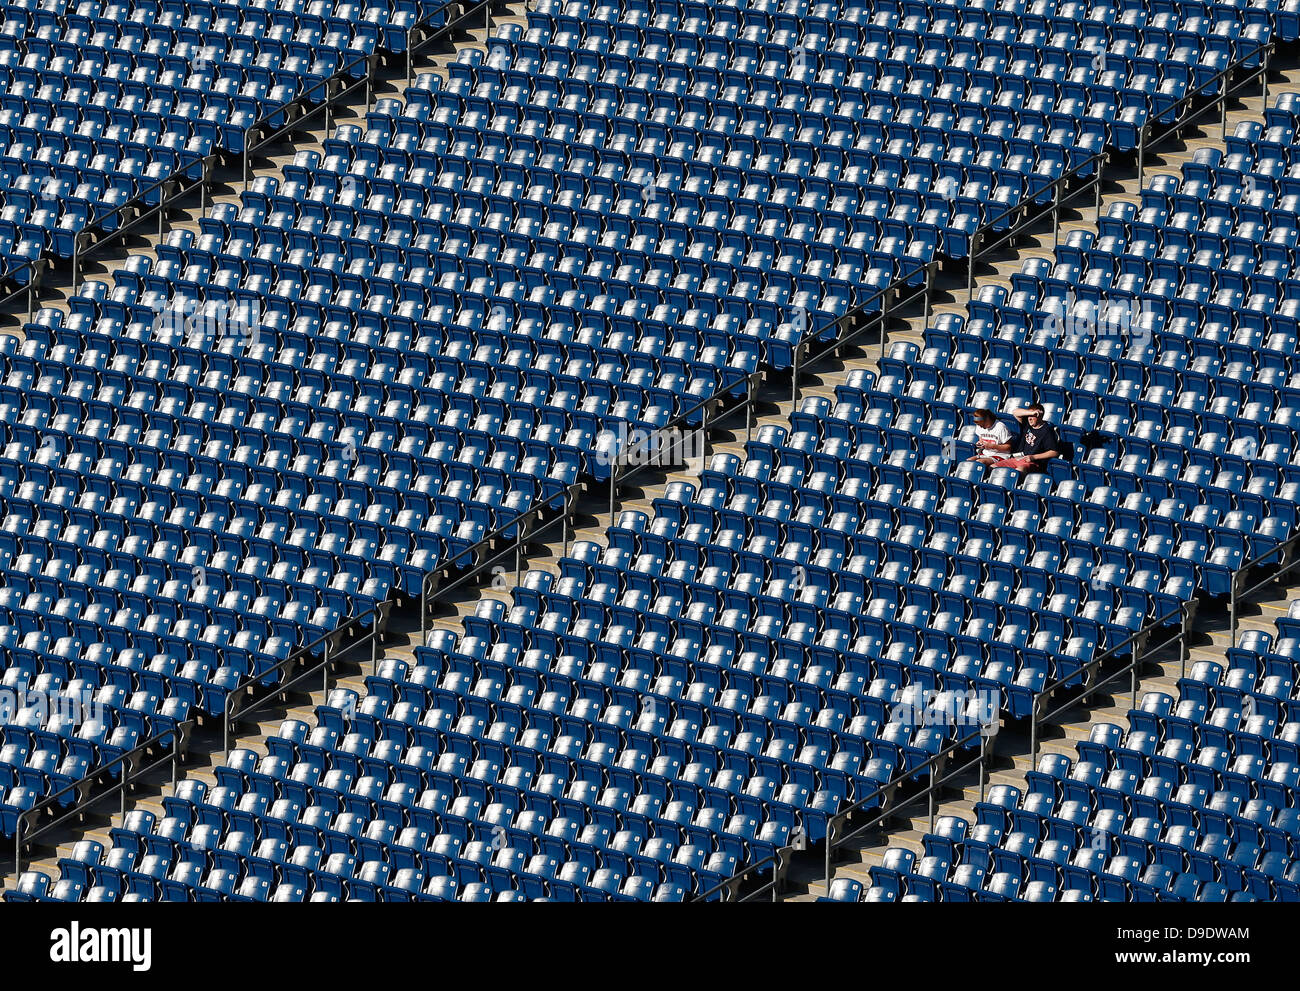 two-people-sitting-in-empty-stadium-D9DW